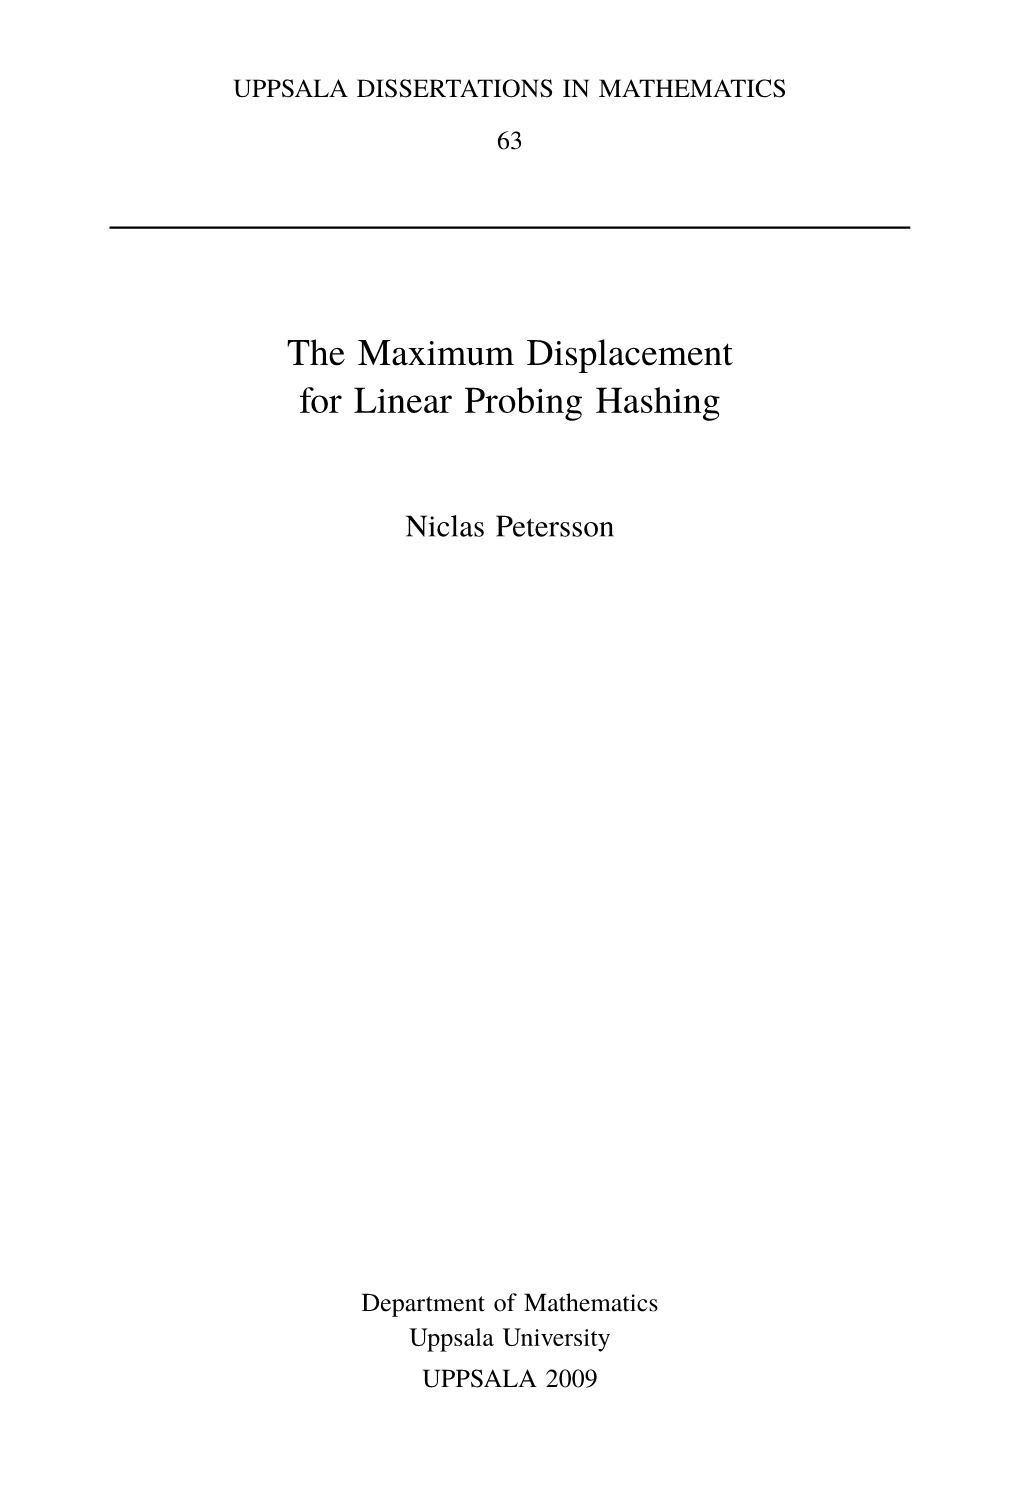 The Maximum Displacement for Linear Probing Hashing